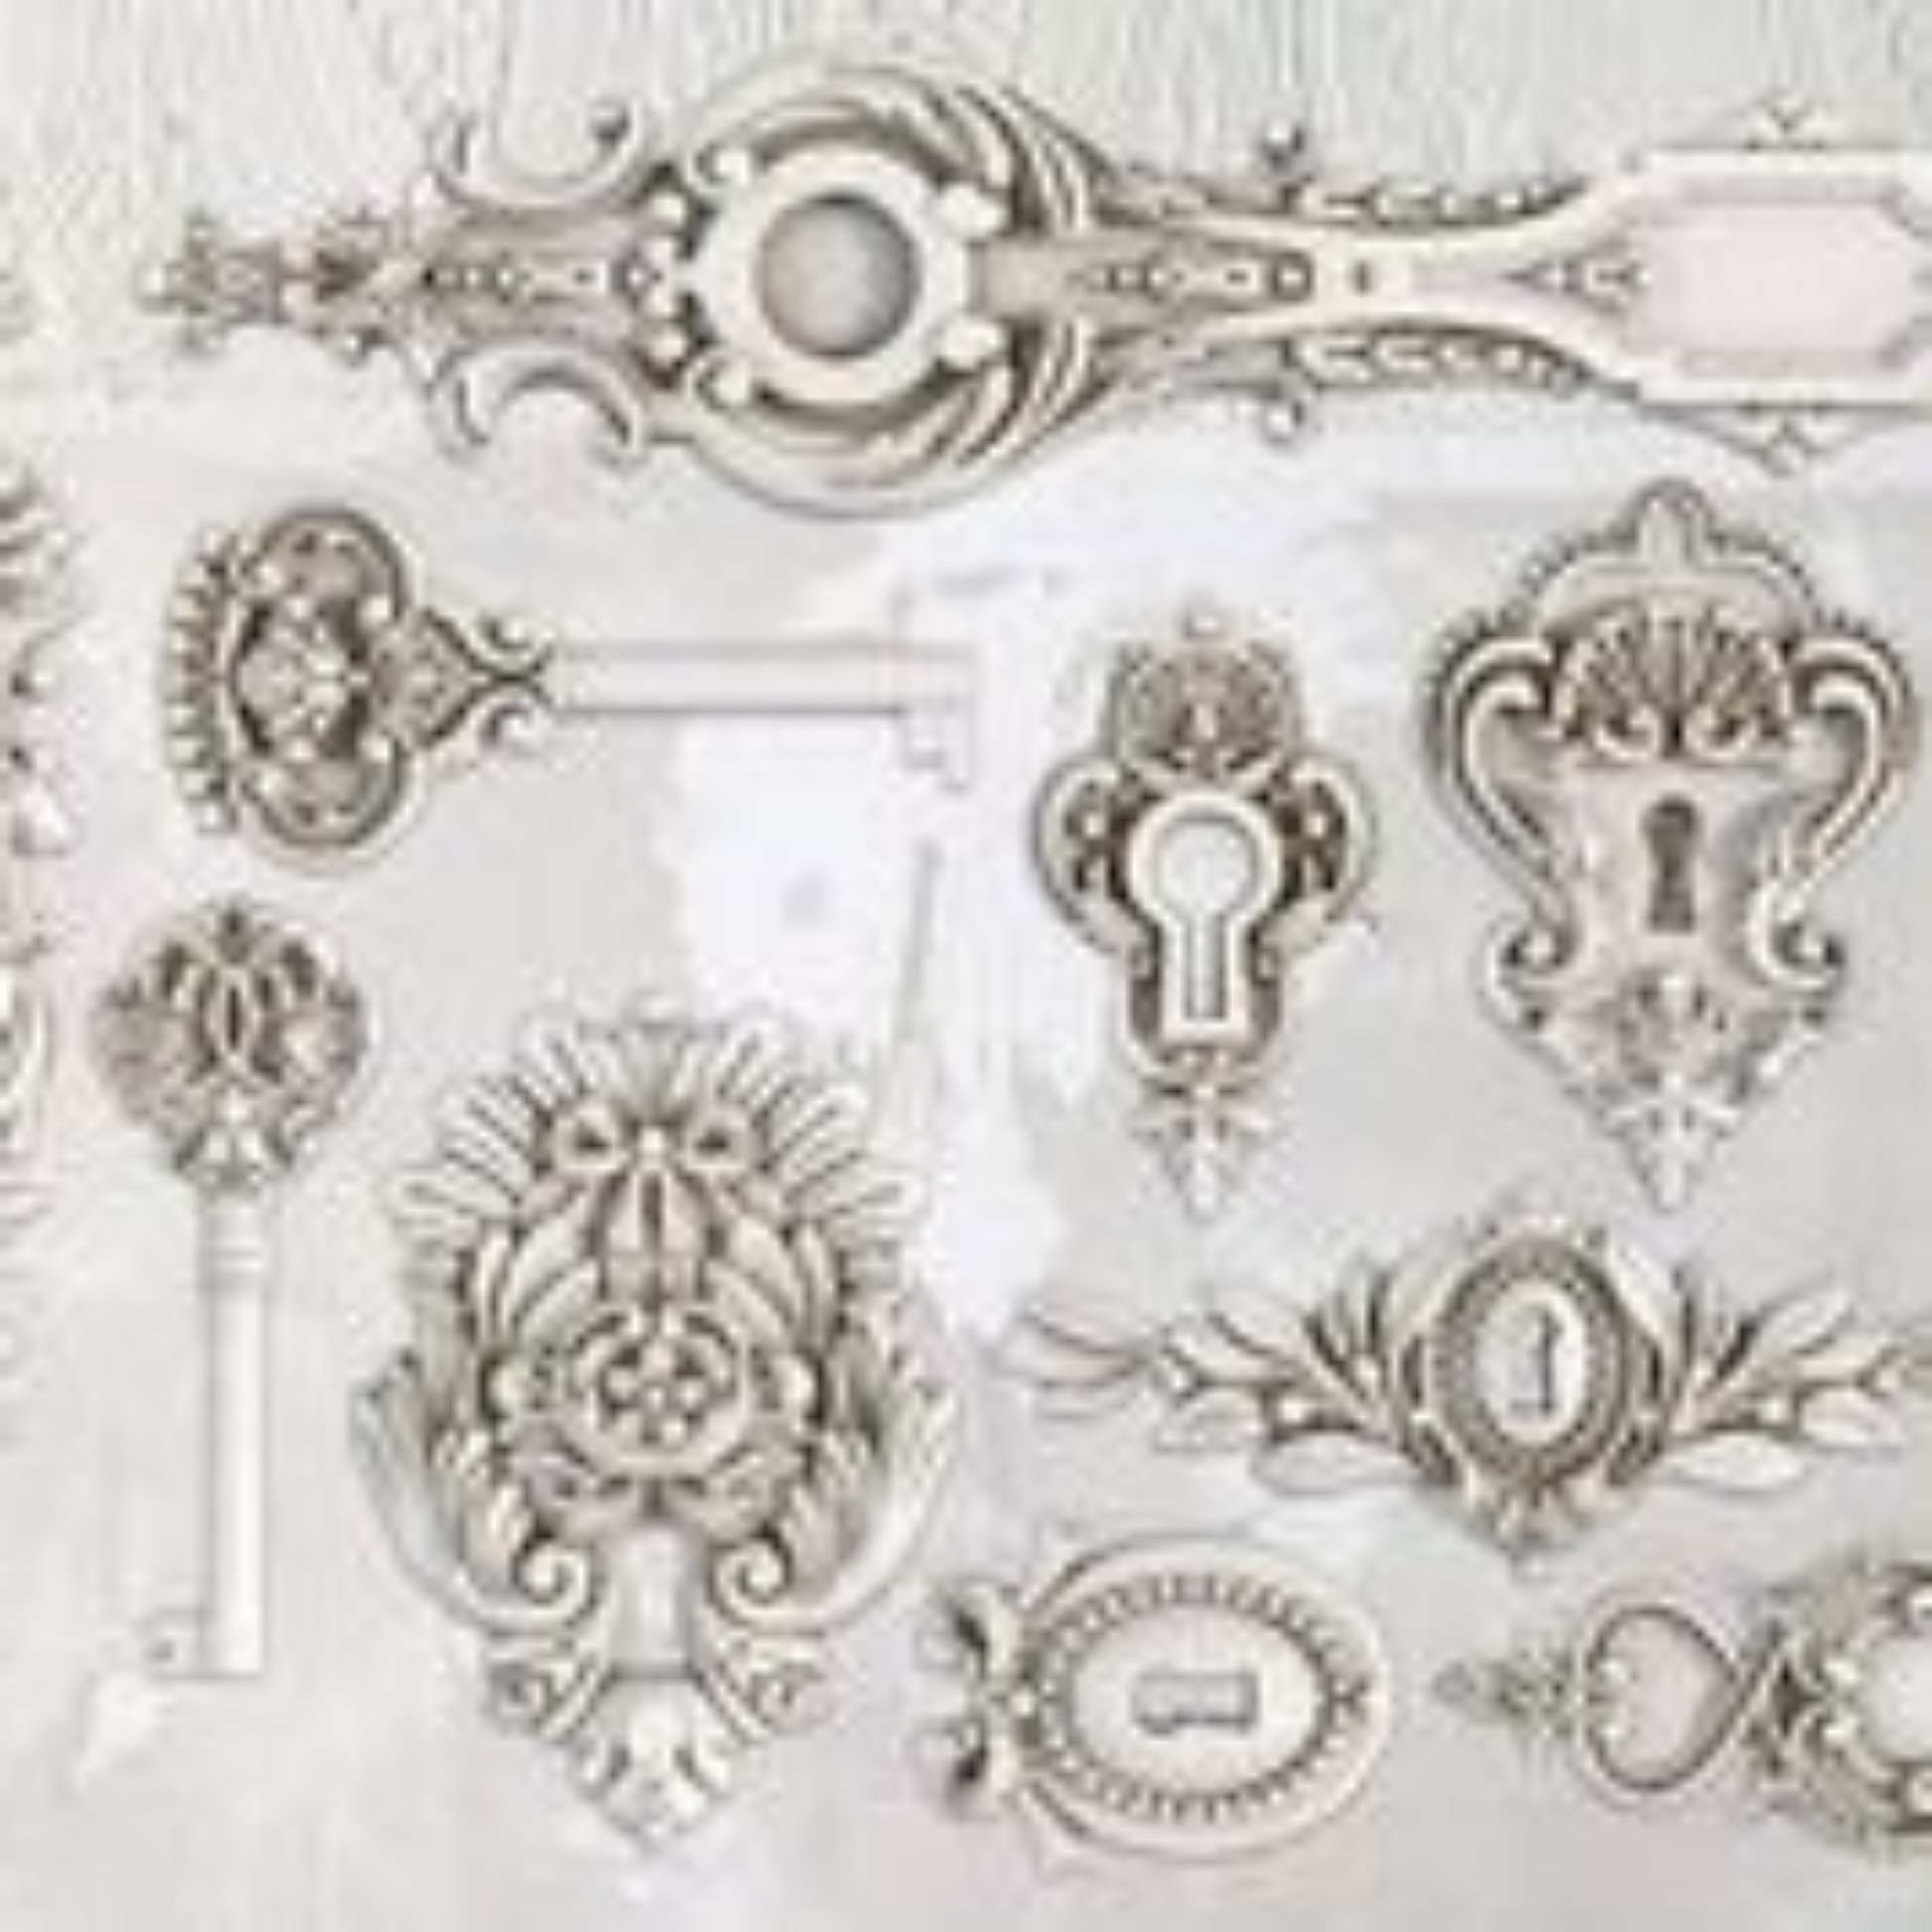 Lock and Key Mold by Iron Orchid Designs sample on white background at Milton's Daughter